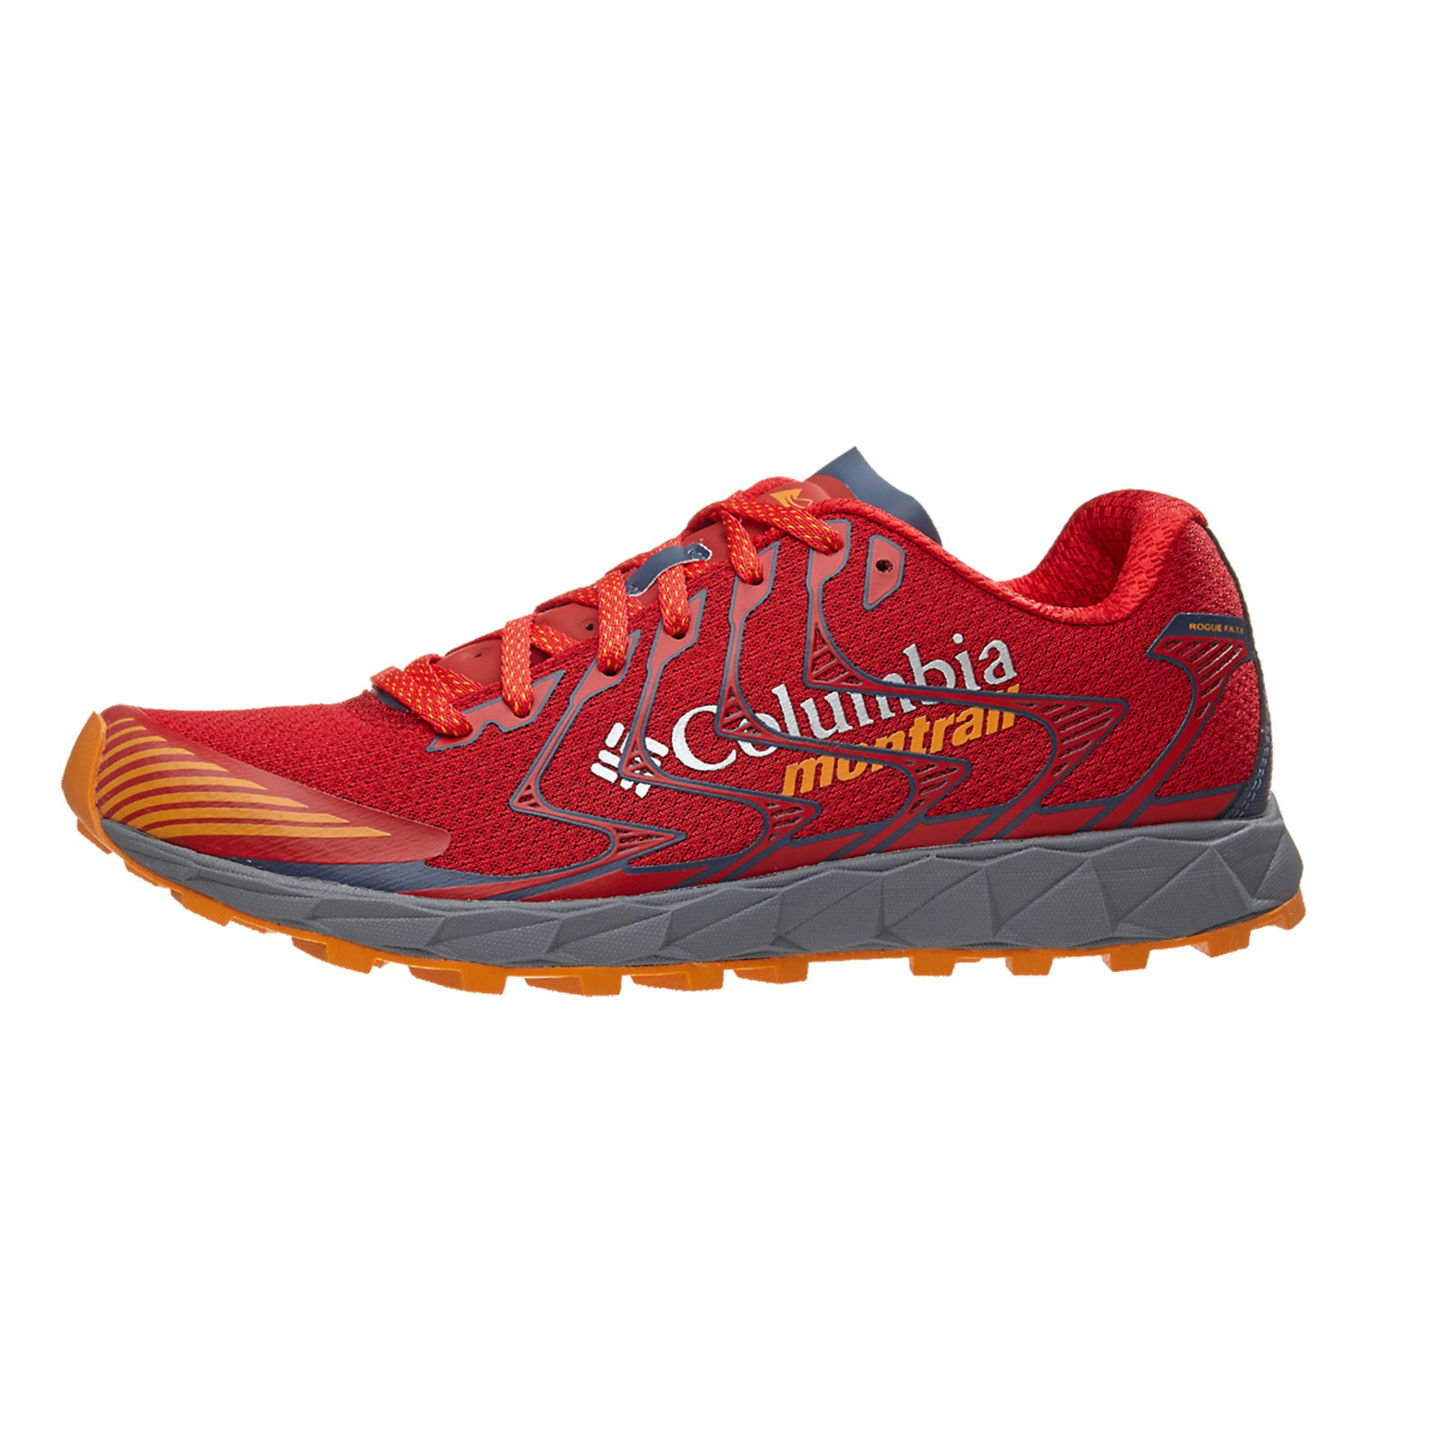 mountain trail running shoes